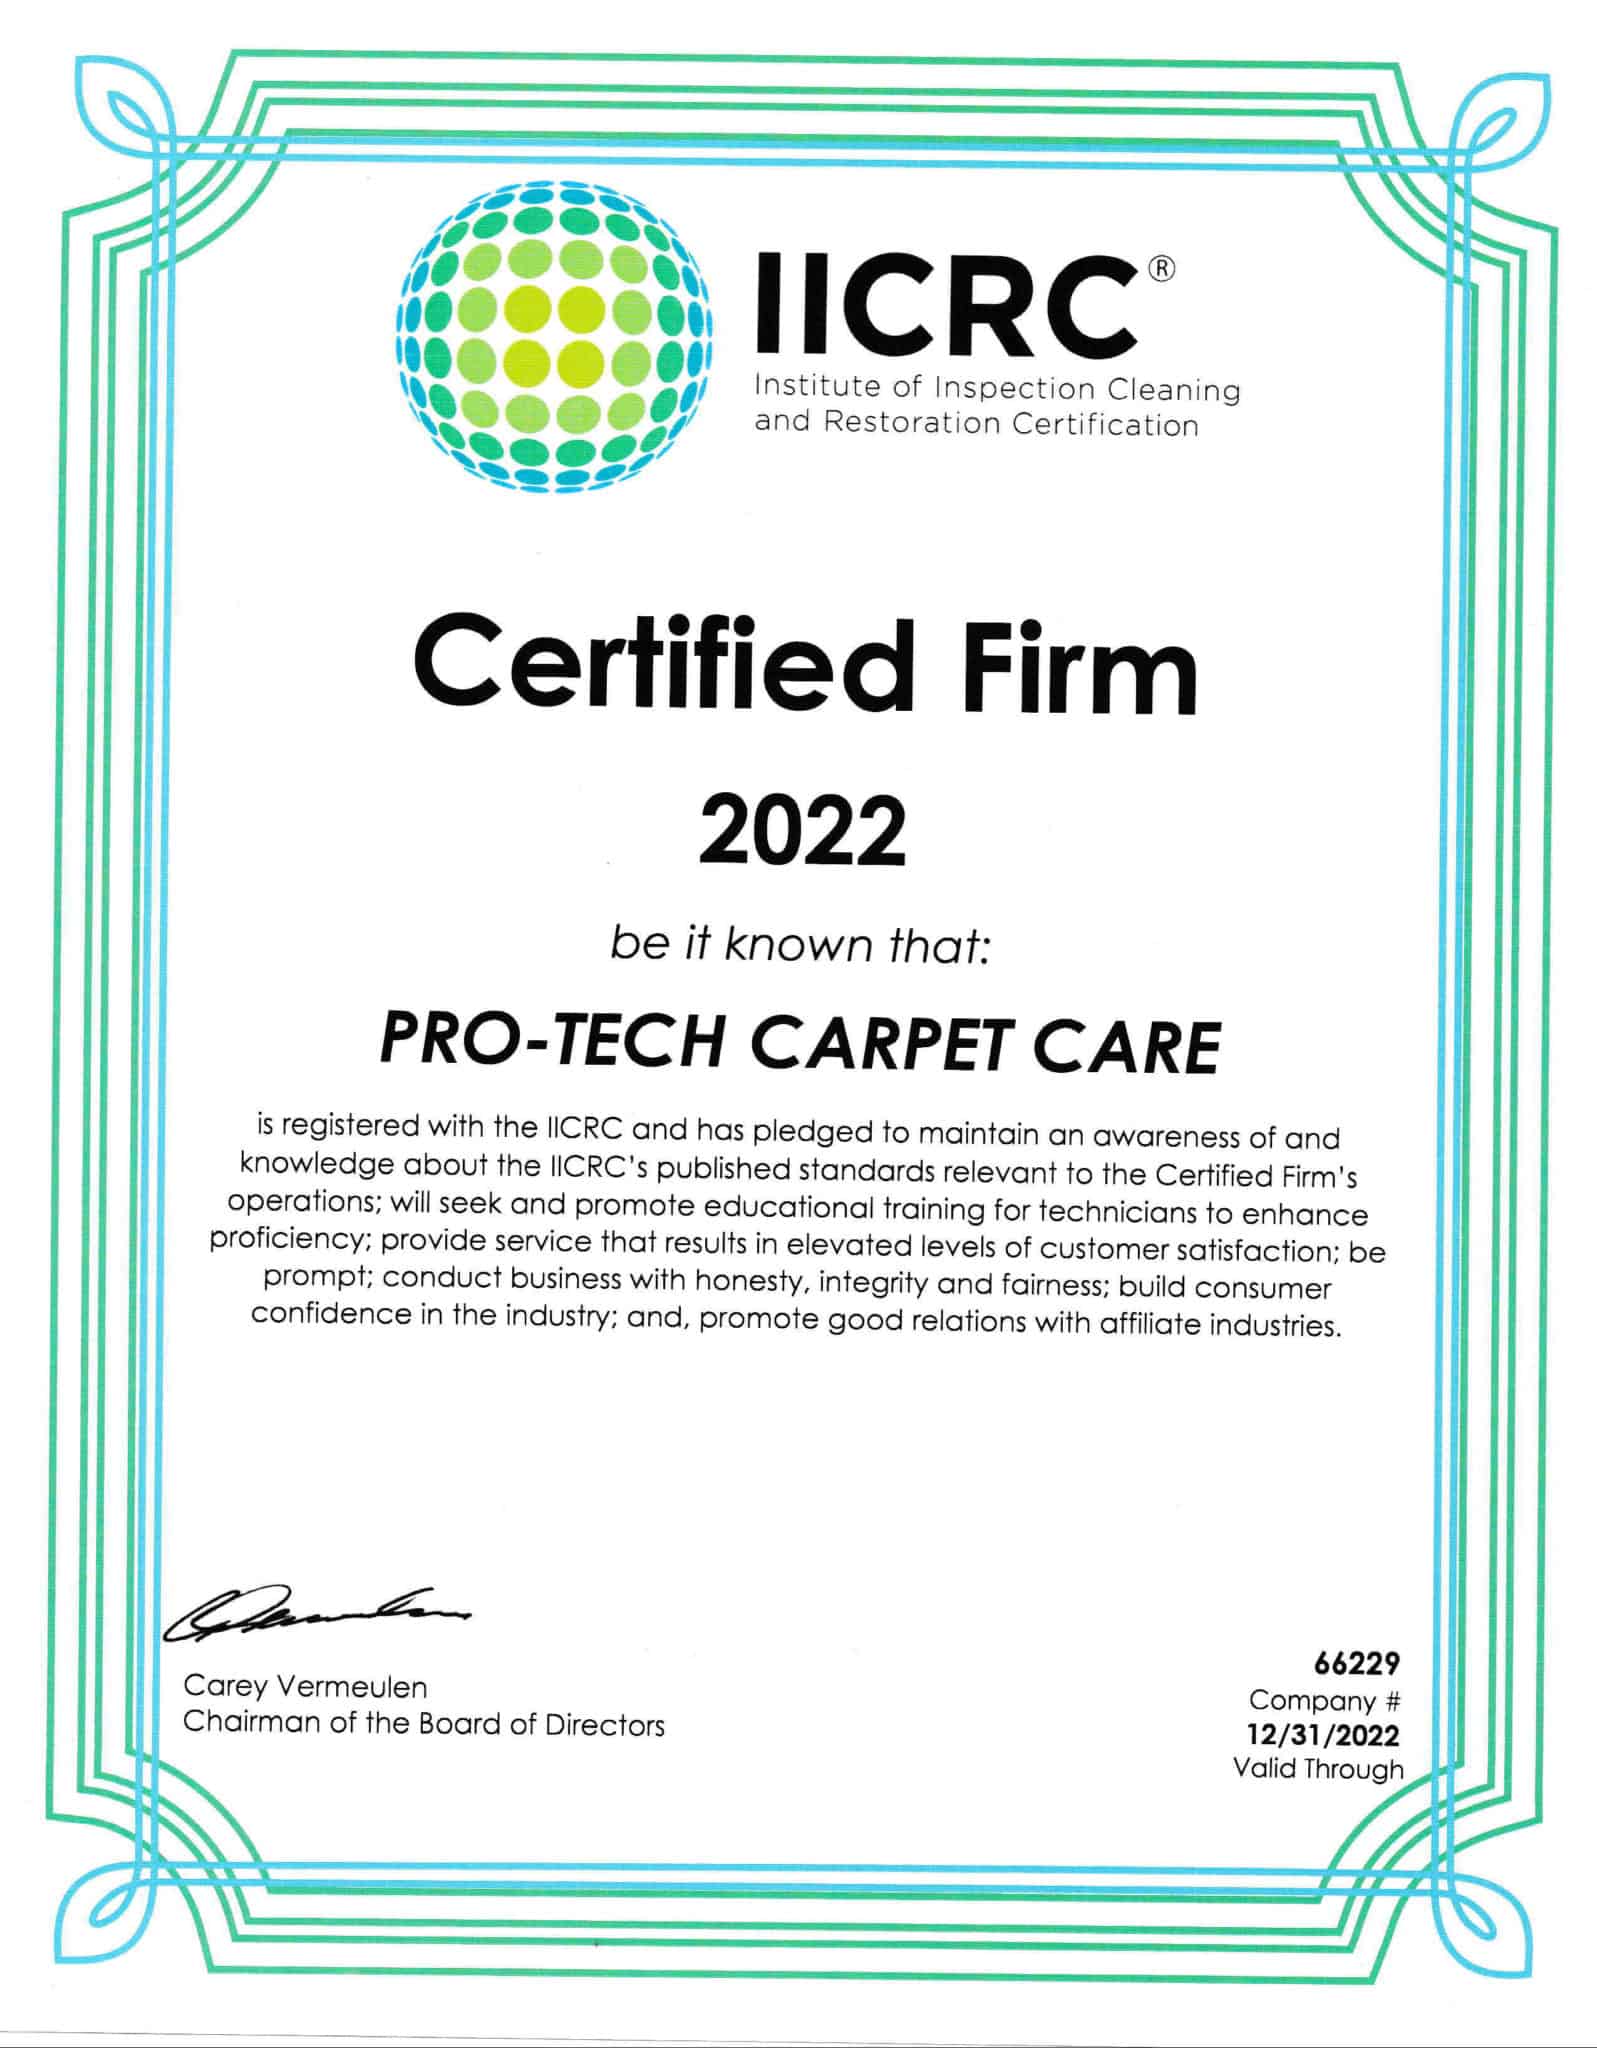 Credentials 2022 1 Scaled, Protech Carpet Care